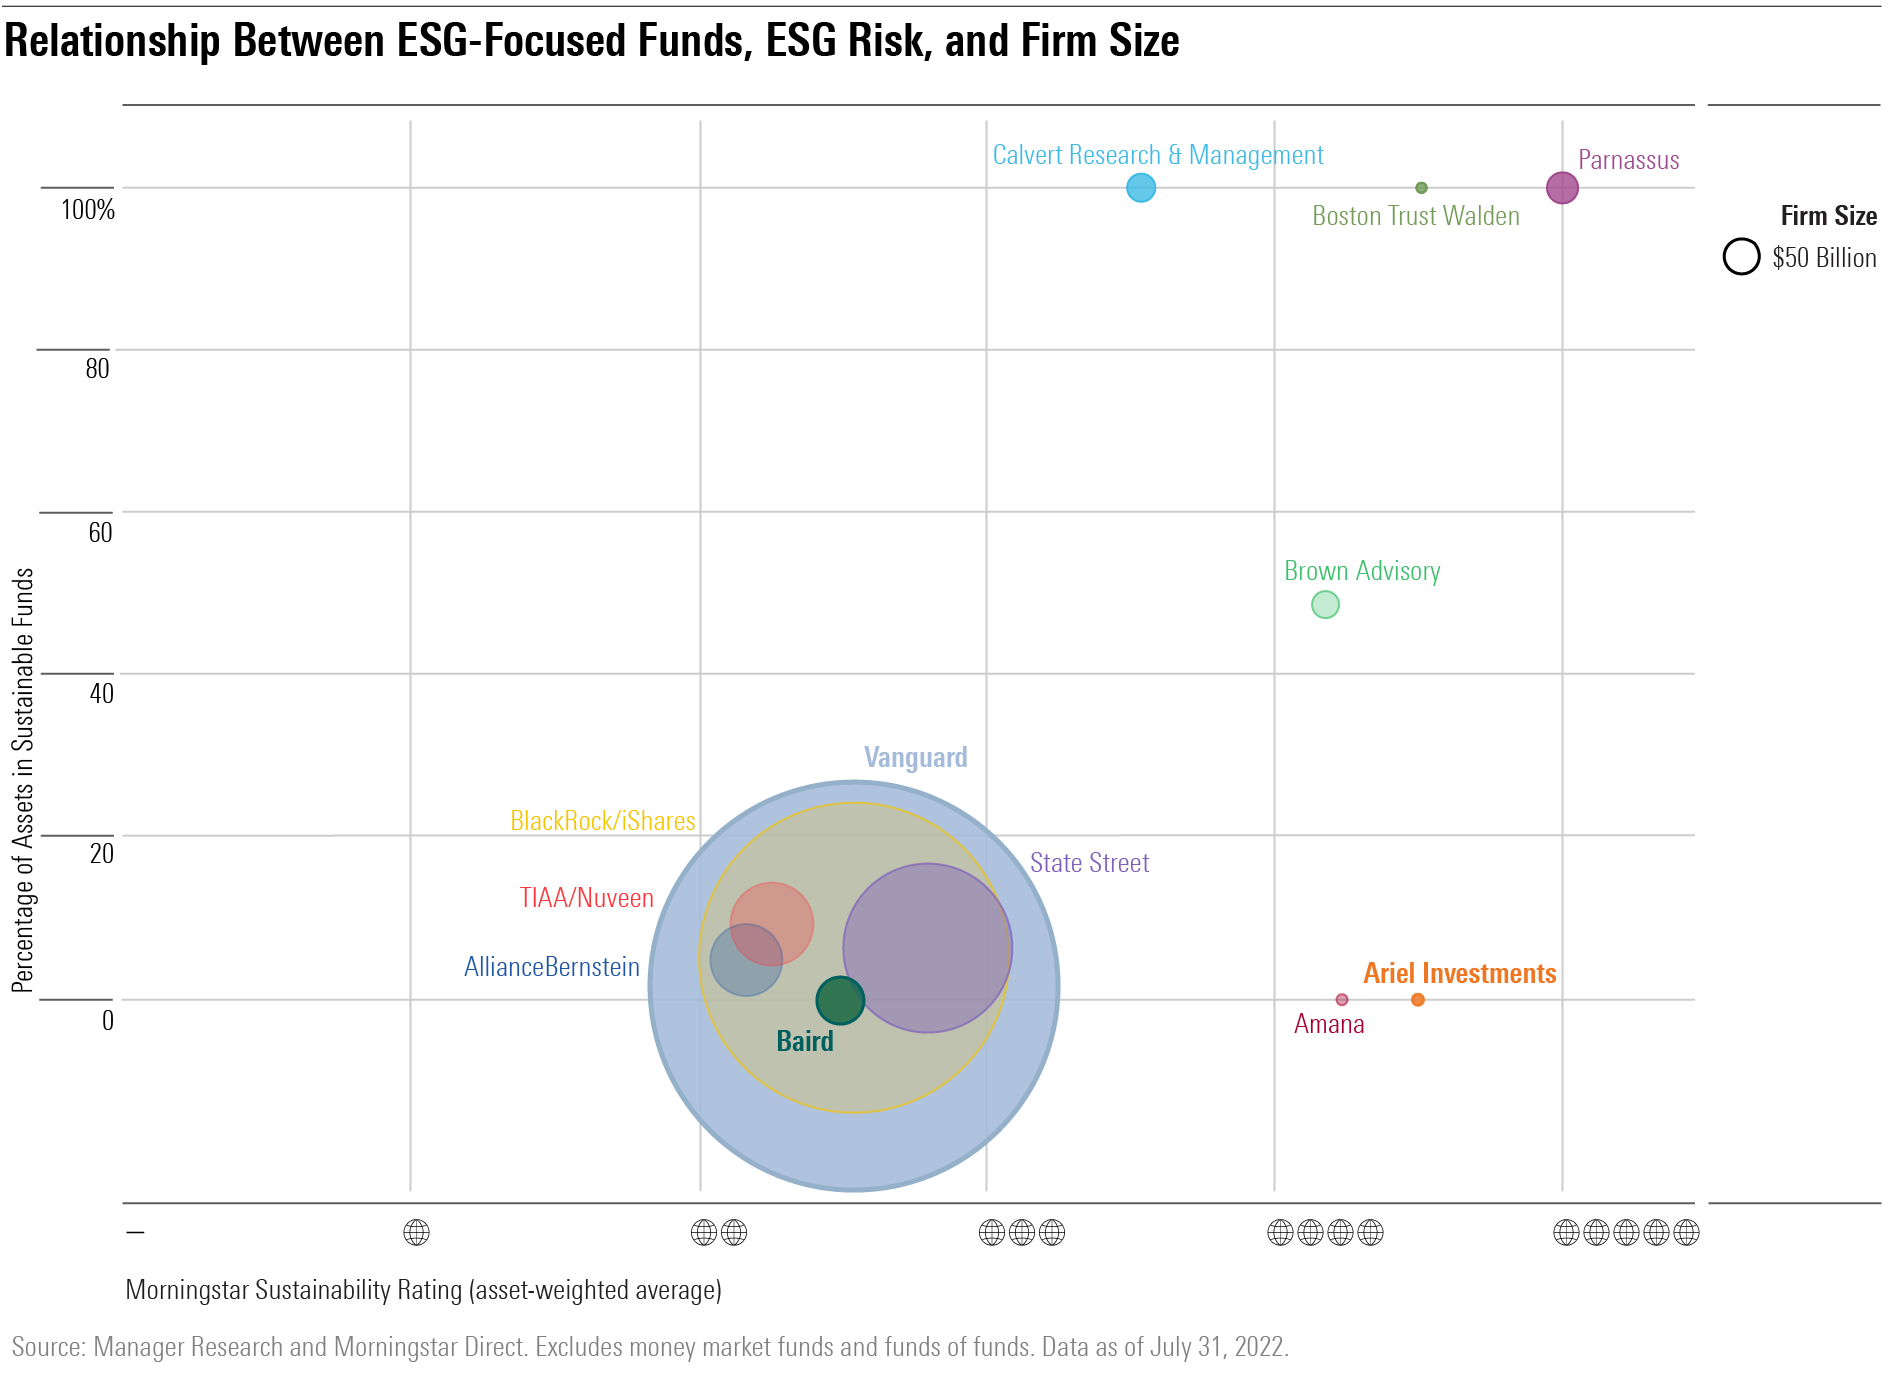 A scatterplot depicting firms' total assets, percentage of assets in ESG-focused funds. and Morningstar Sustainabilty Ratings.